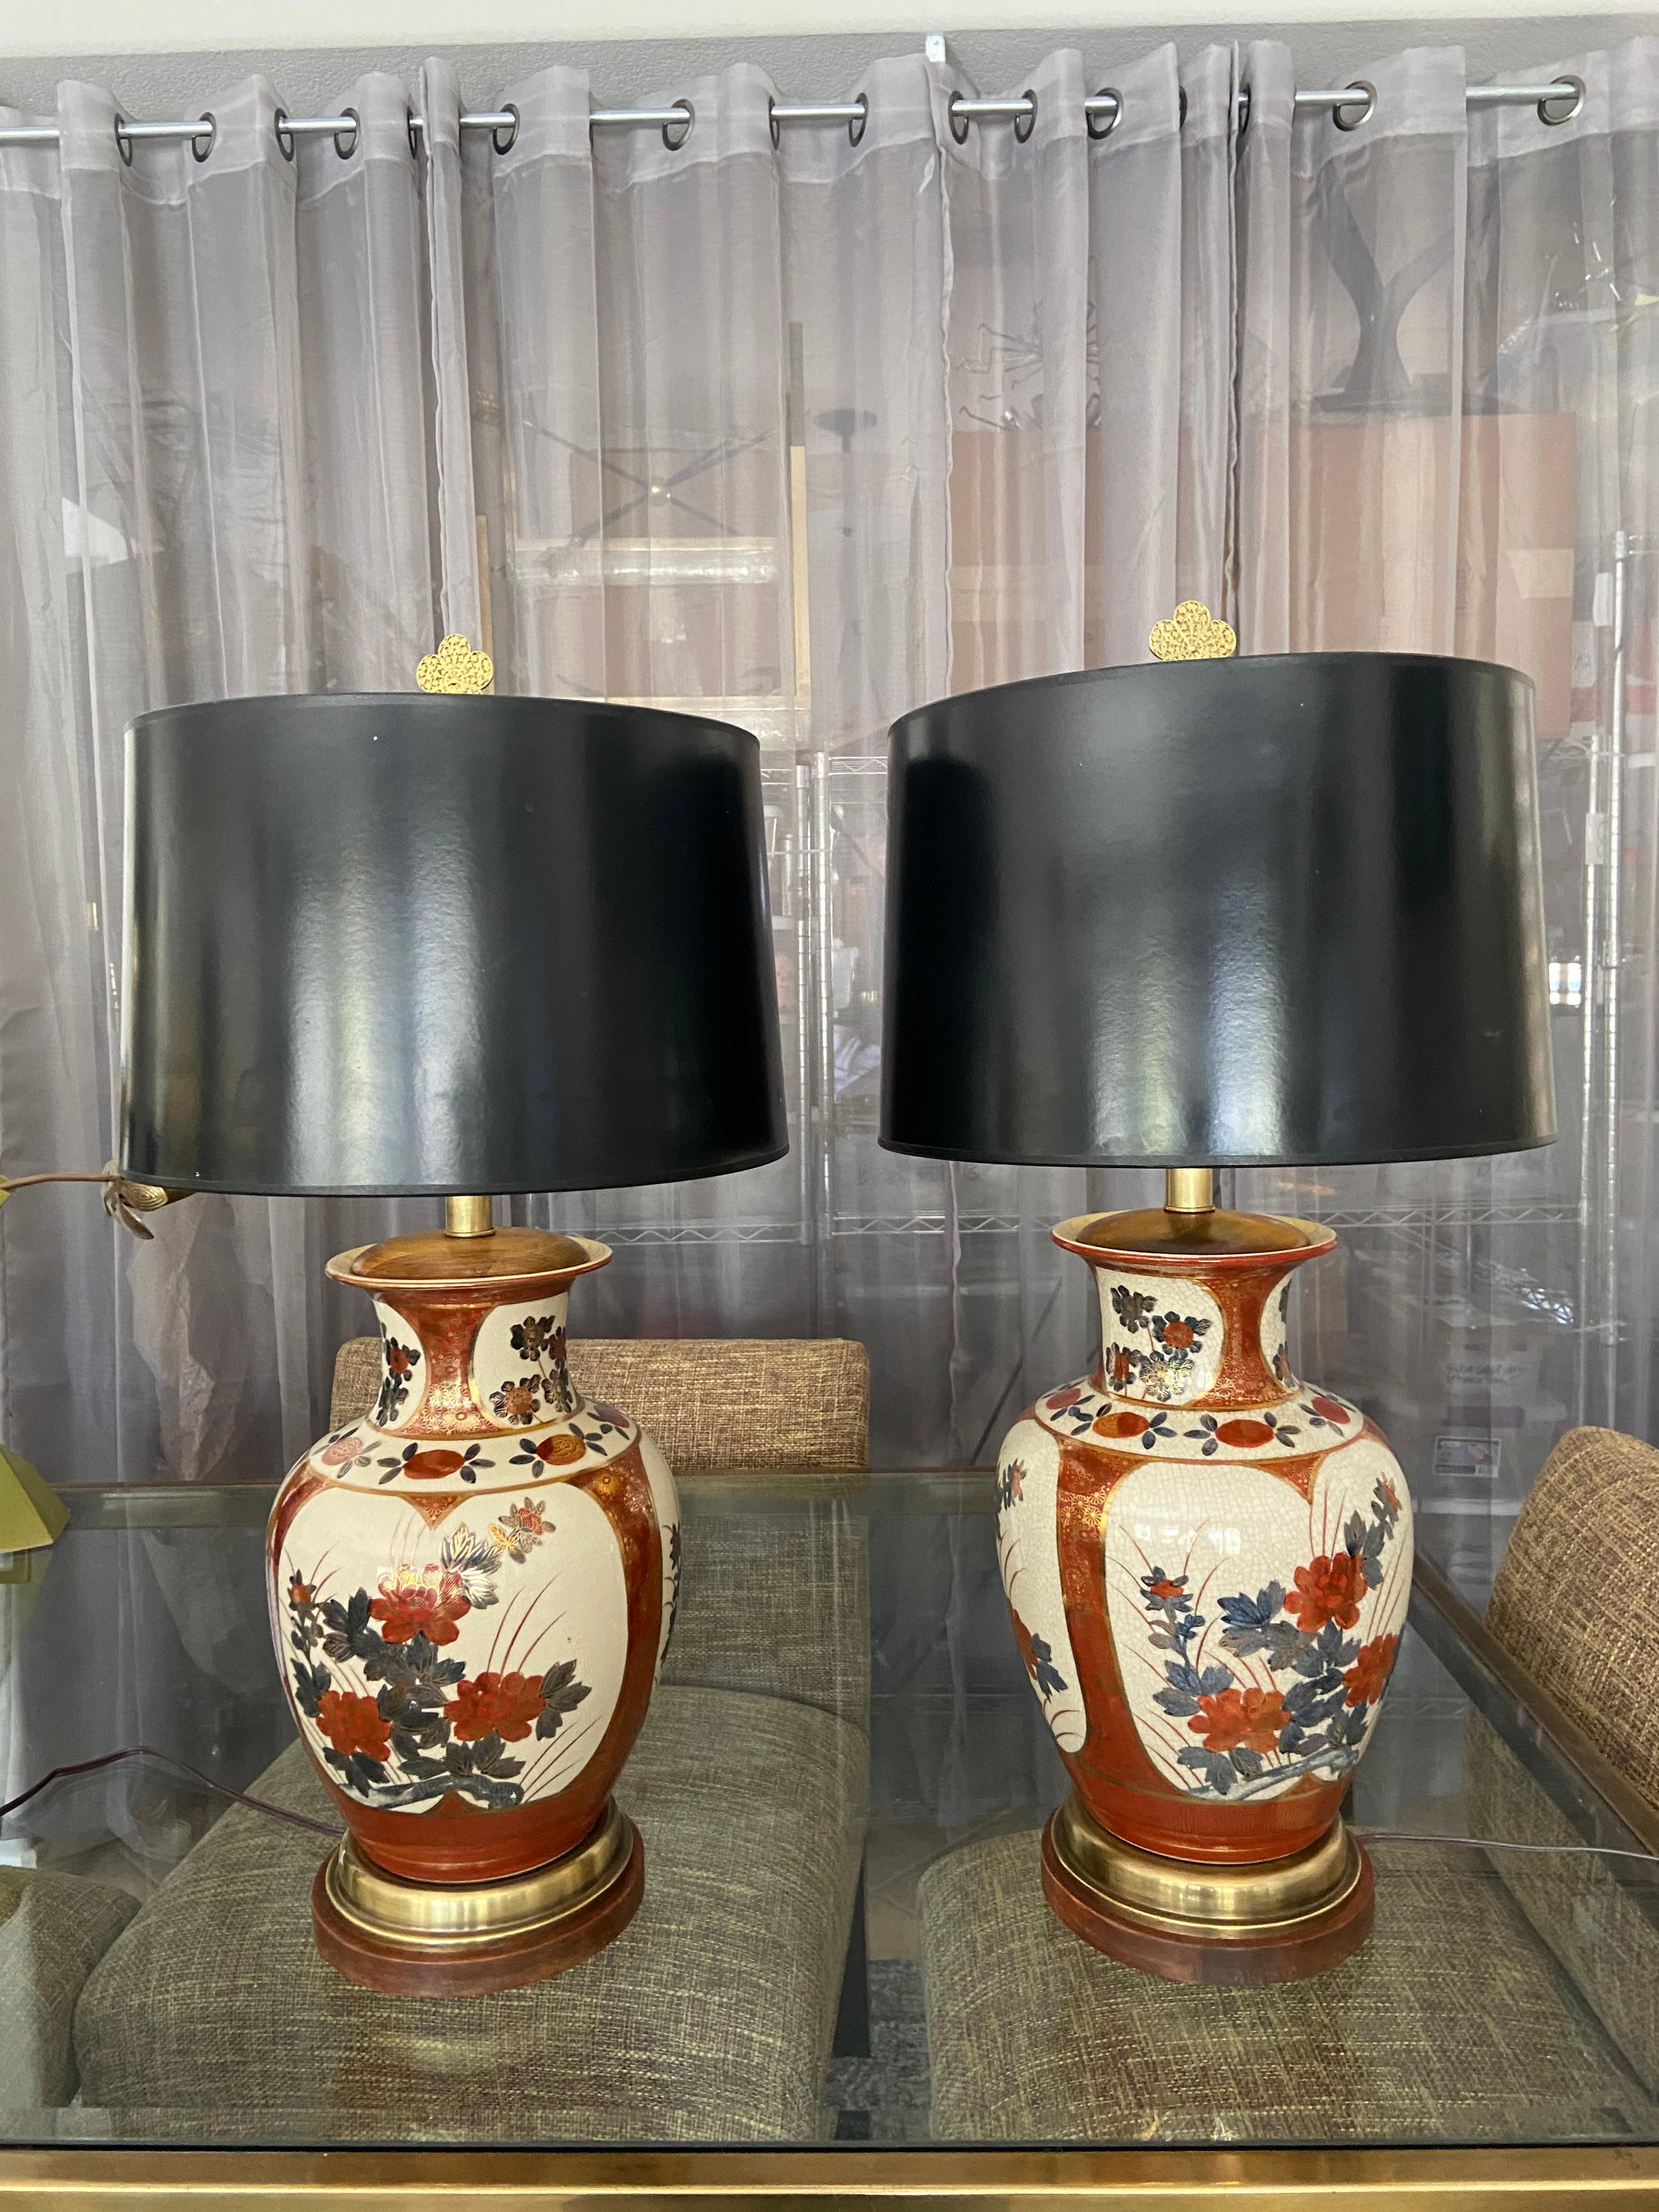 Pair of Japanese Imari porcelain crackle finish vases mounted on original custom brass and wood bases. The colors are a rich burnt orange and soft blue with gold outlining, the design is a classic flower and leaf motif. Originally made by Frederick